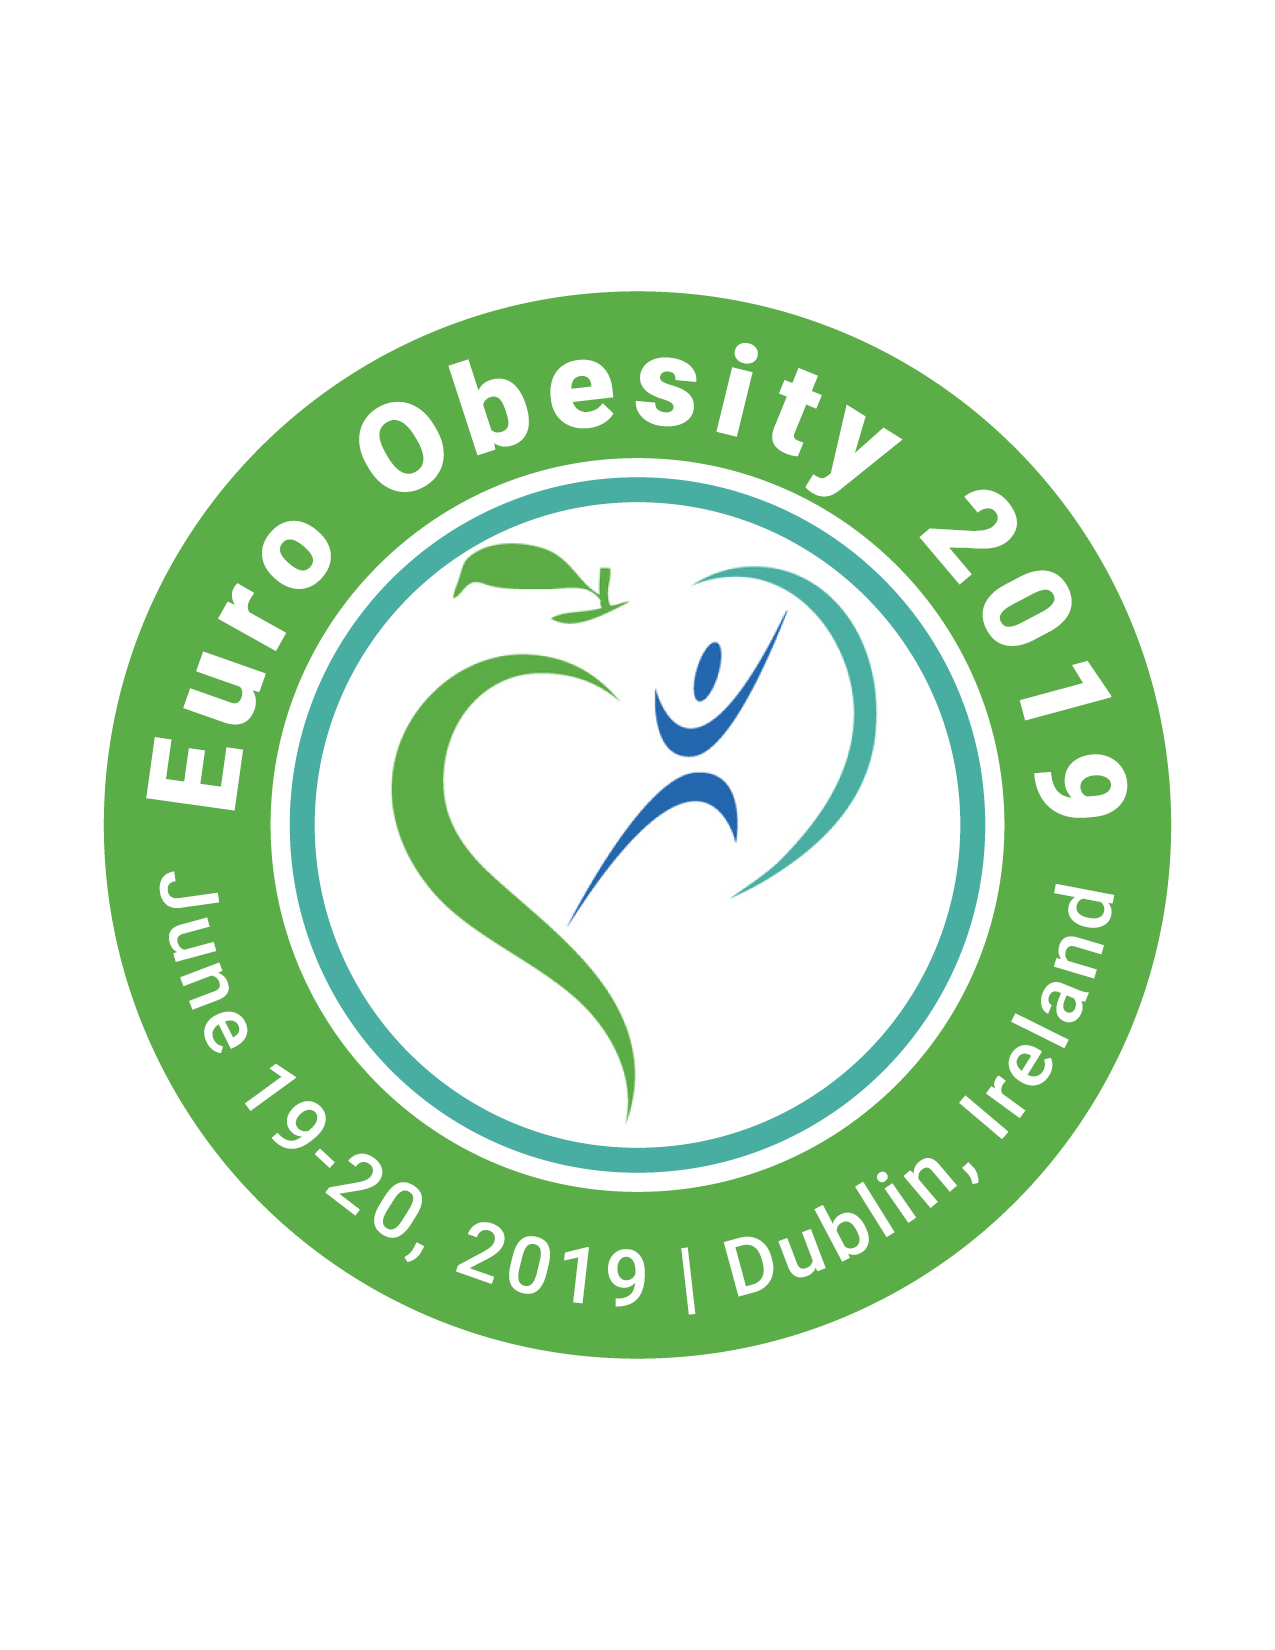 5th International Conference on Obesity and Weight Management